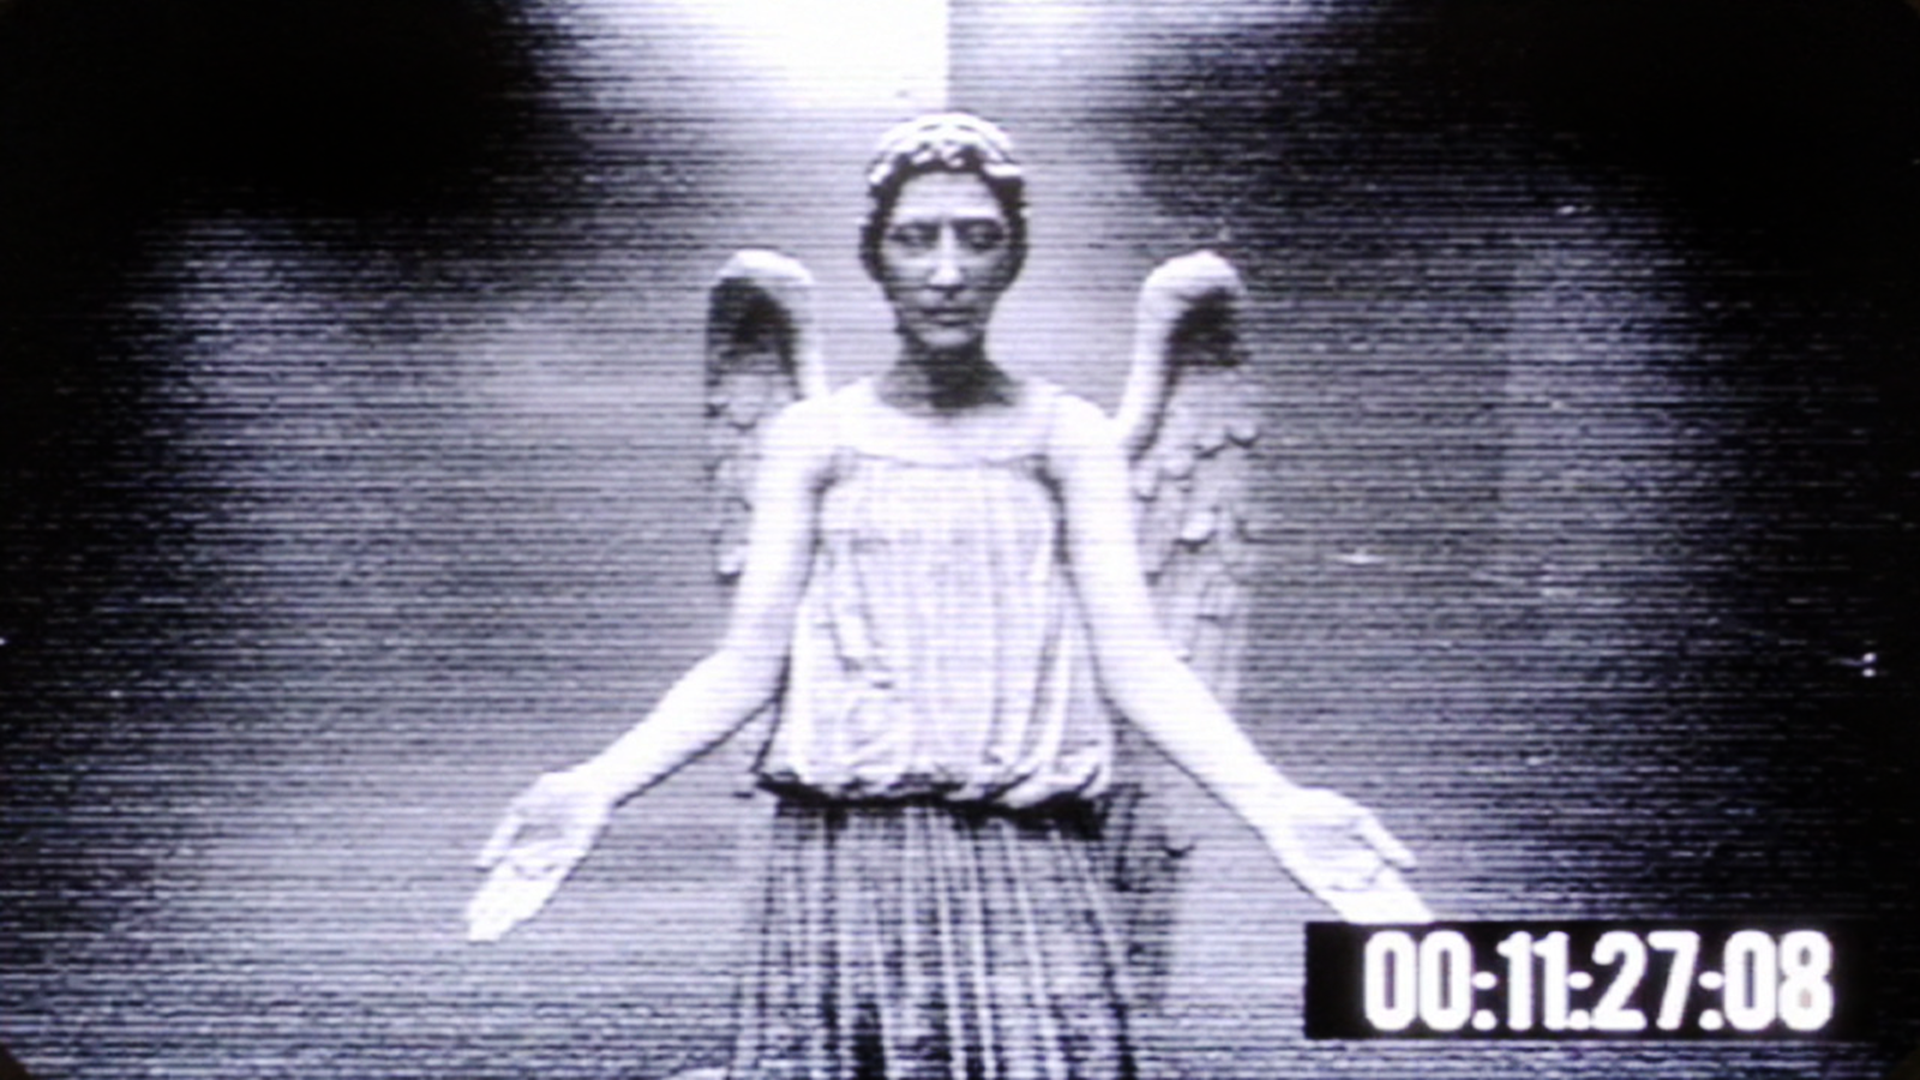 Weeping Angels Wallpaper Set It To Change Every Few Seconds For